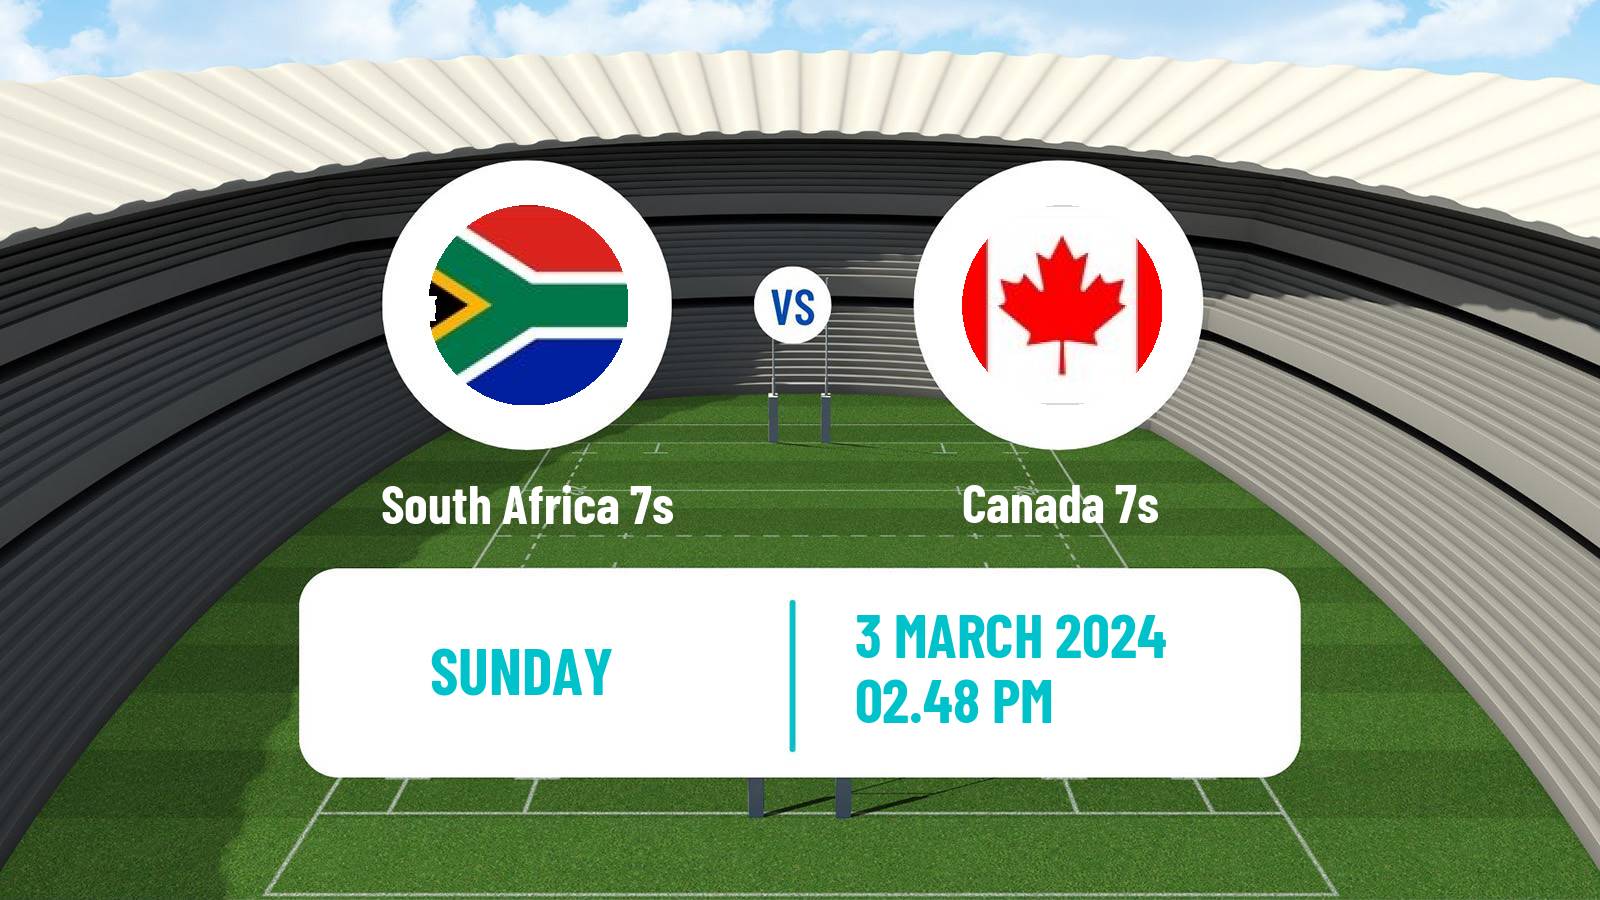 Rugby union Sevens World Series - USA South Africa 7s - Canada 7s